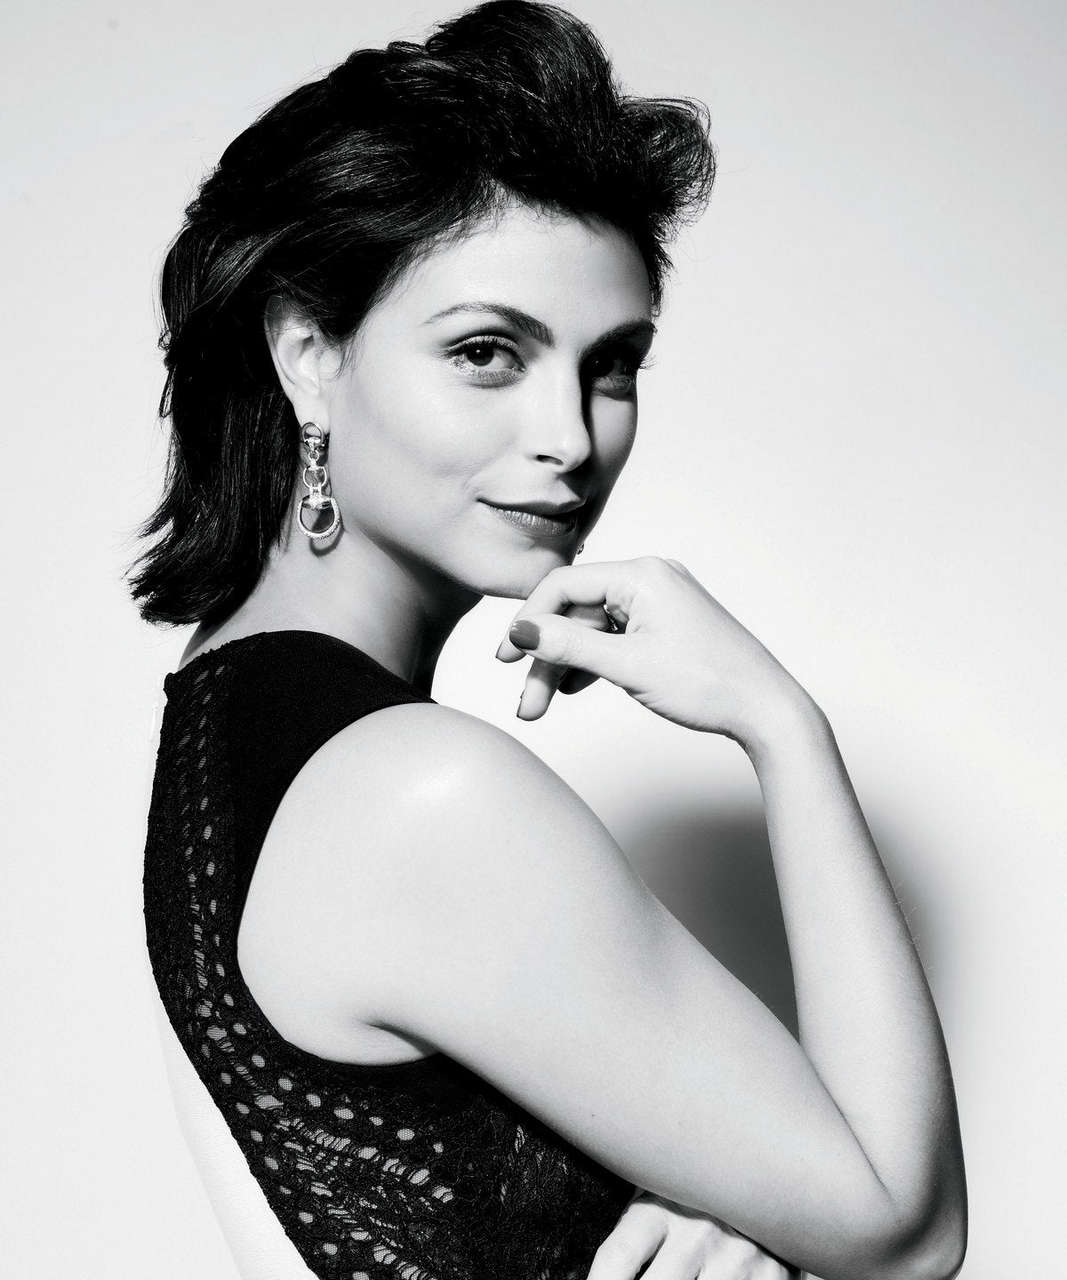 Morena Baccarin Album Topless At End NSFW